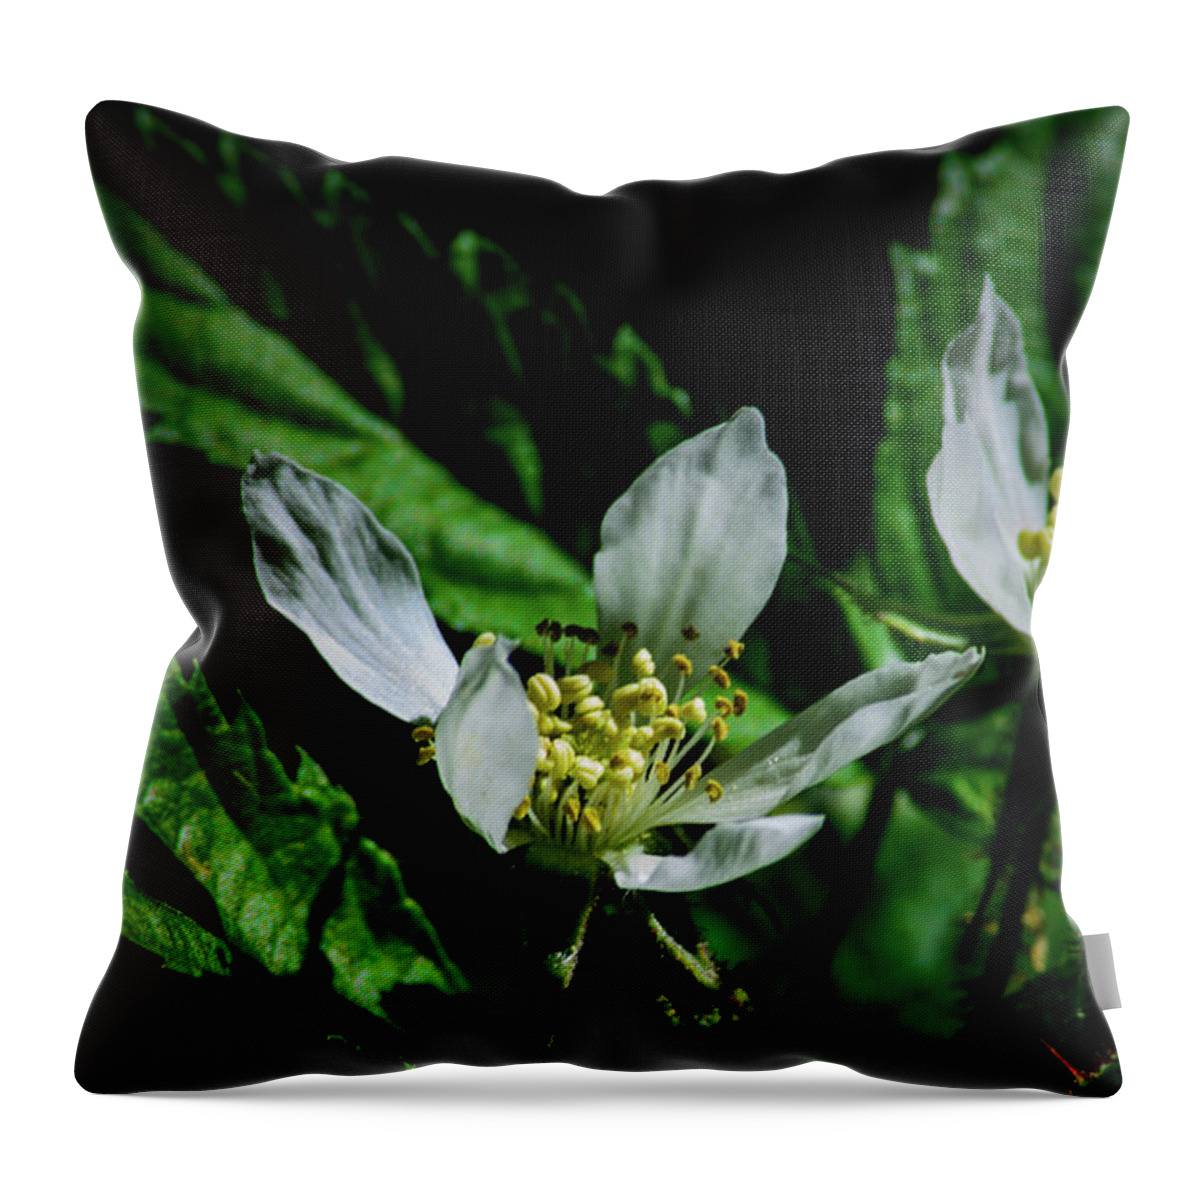 Flower Throw Pillow featuring the photograph Fruit Blossom by Tikvah's Hope